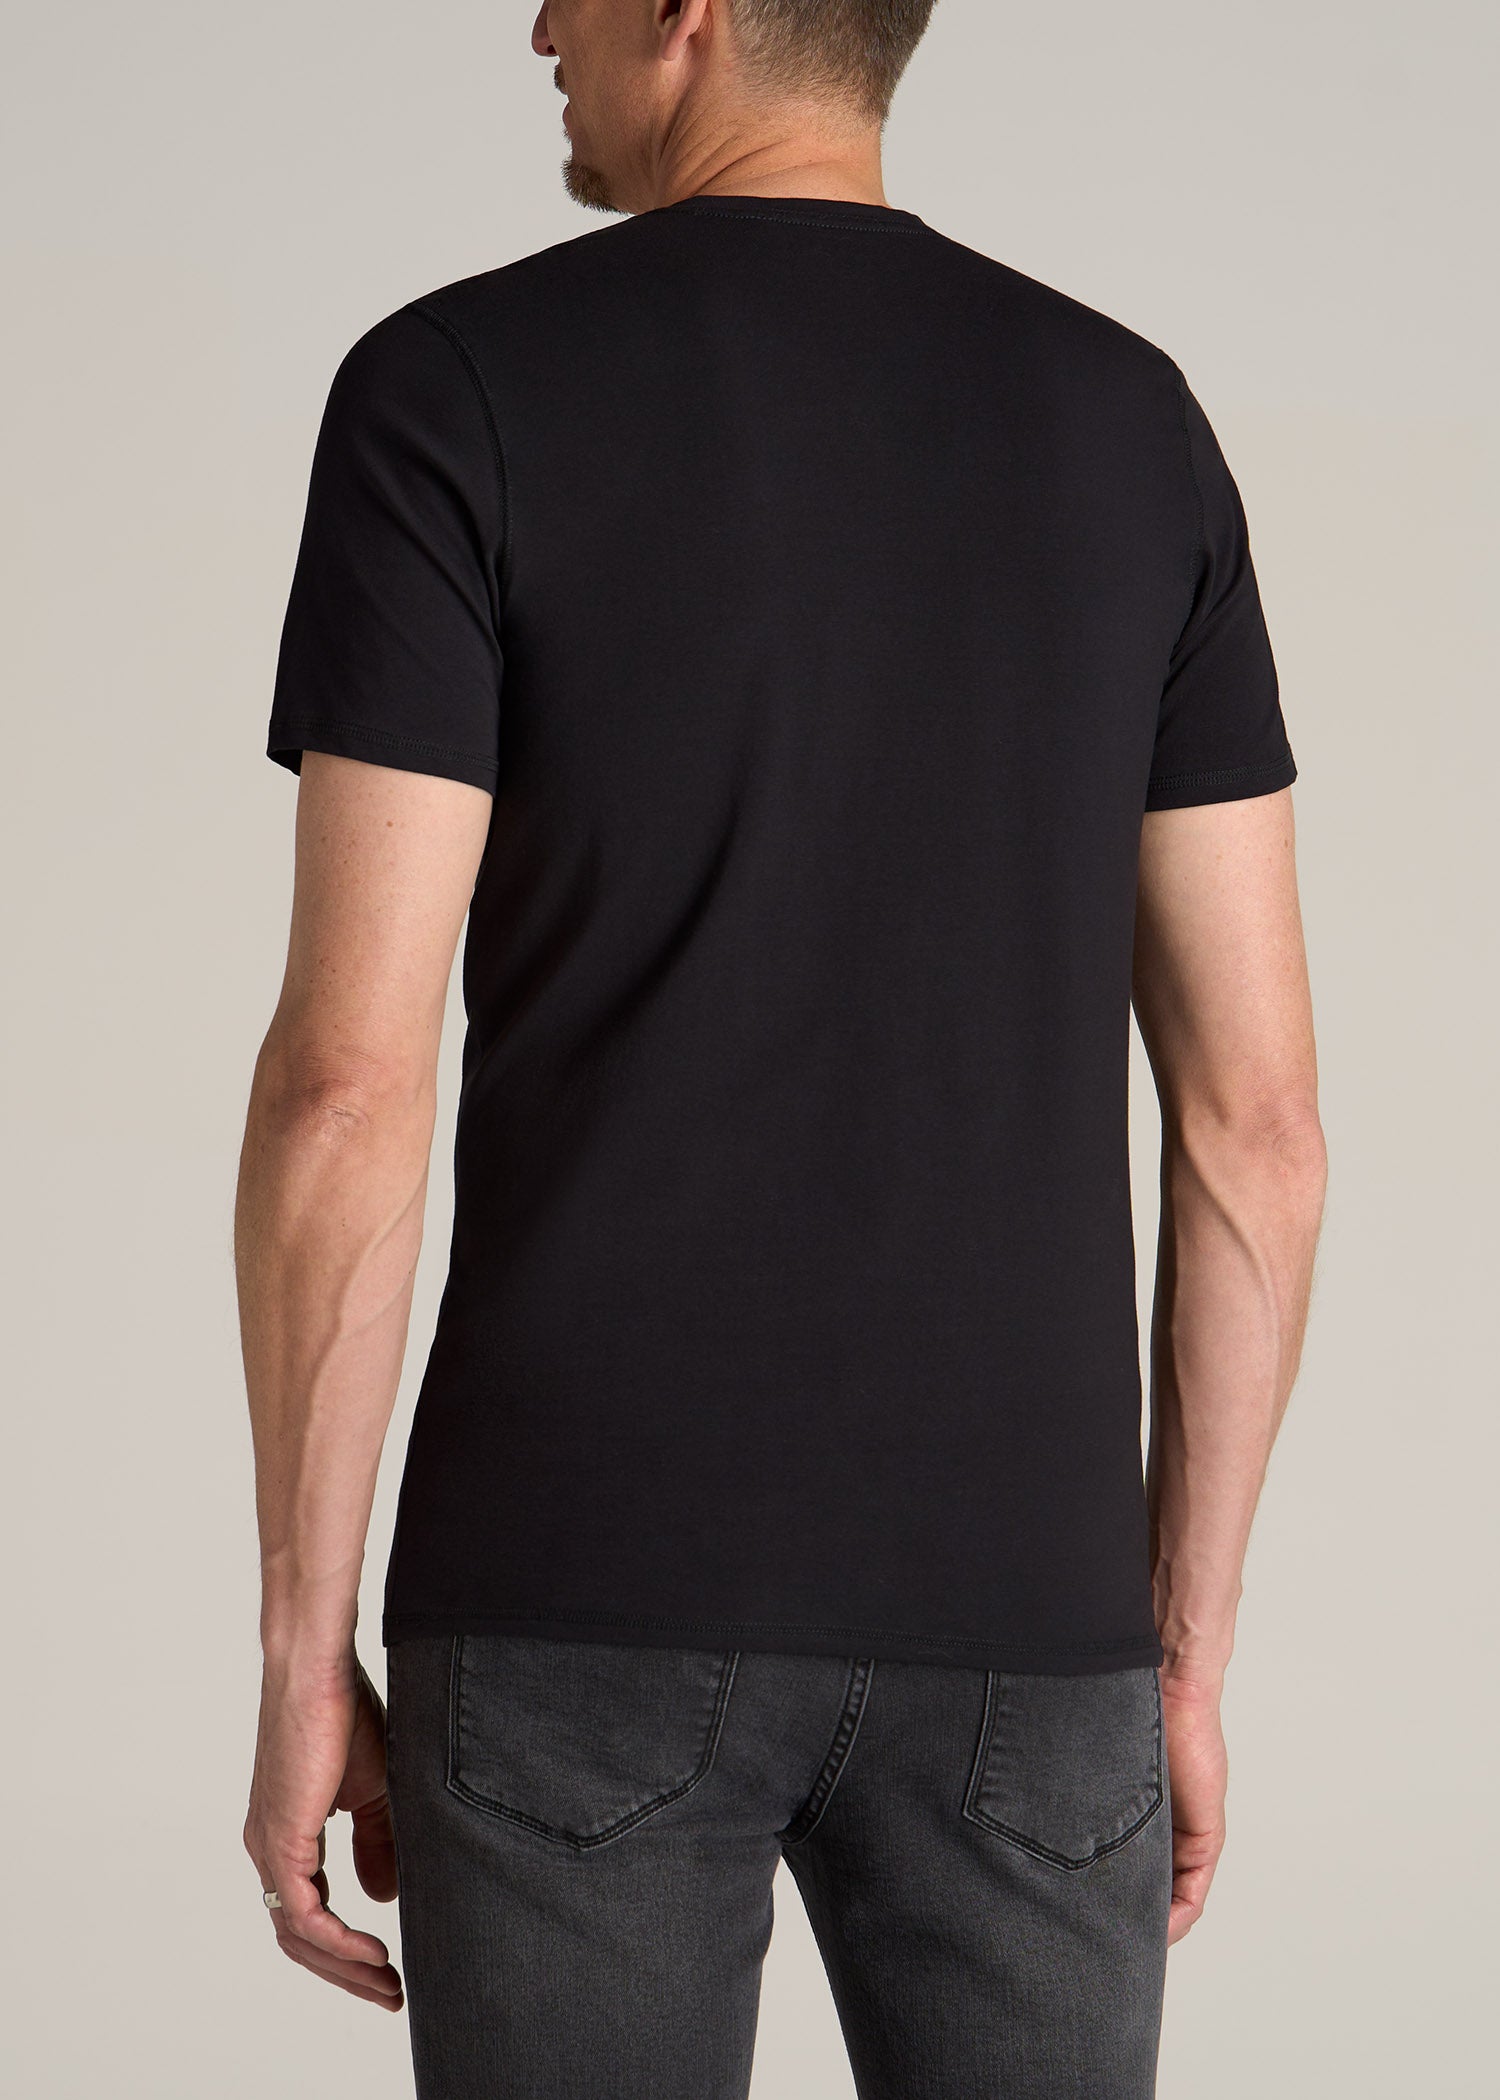 The Essential REGULAR-FIT V-Neck Men's Tall Tees in Black – American Tall